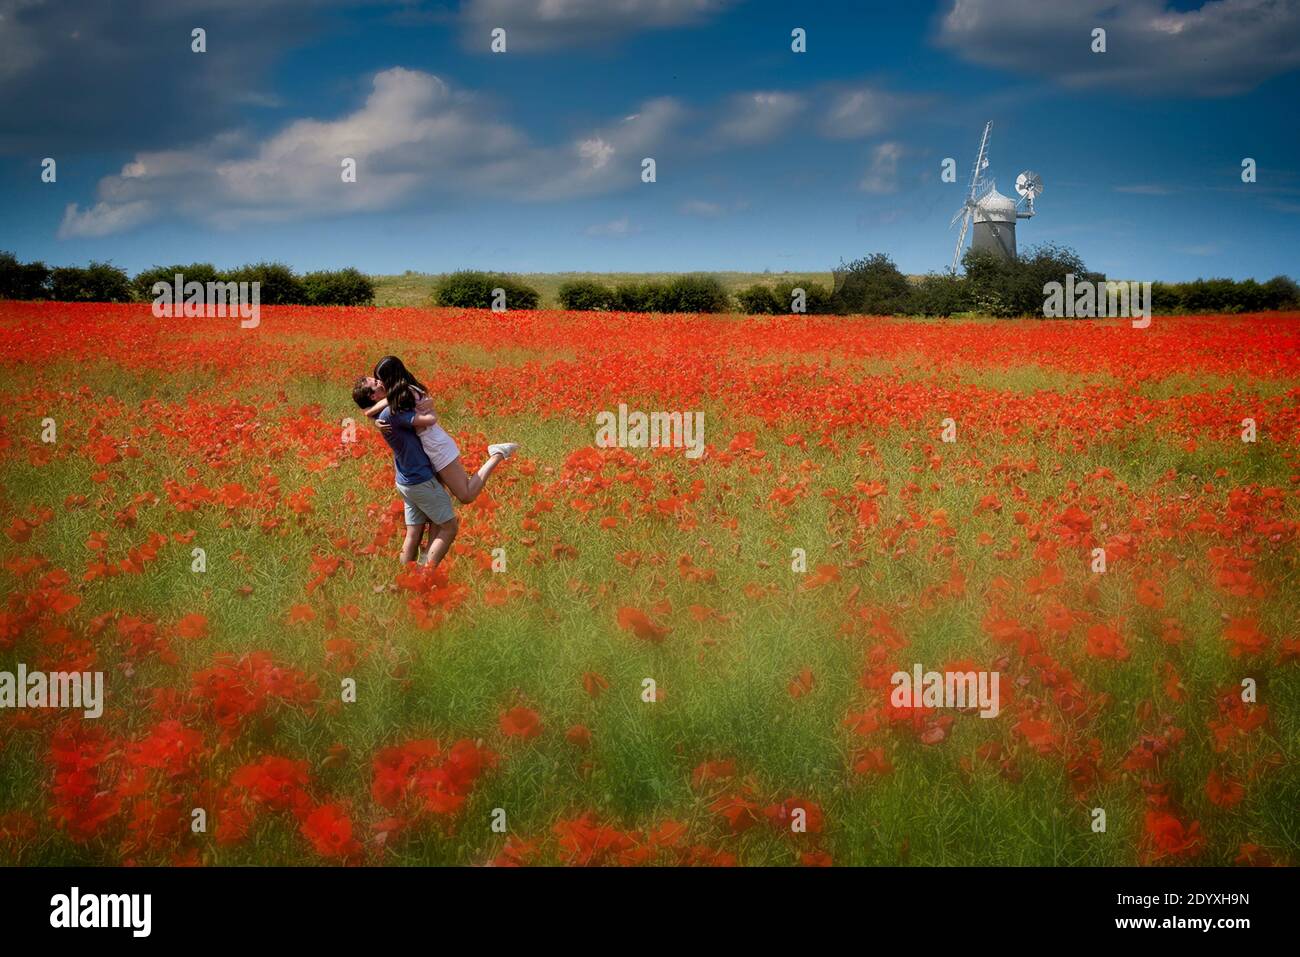 Red diffused poppies in field with hedgerow in distance. Windmill on skyline with blue sky and fluffy white clouds. Couple embracing among the flowers. Stock Photo